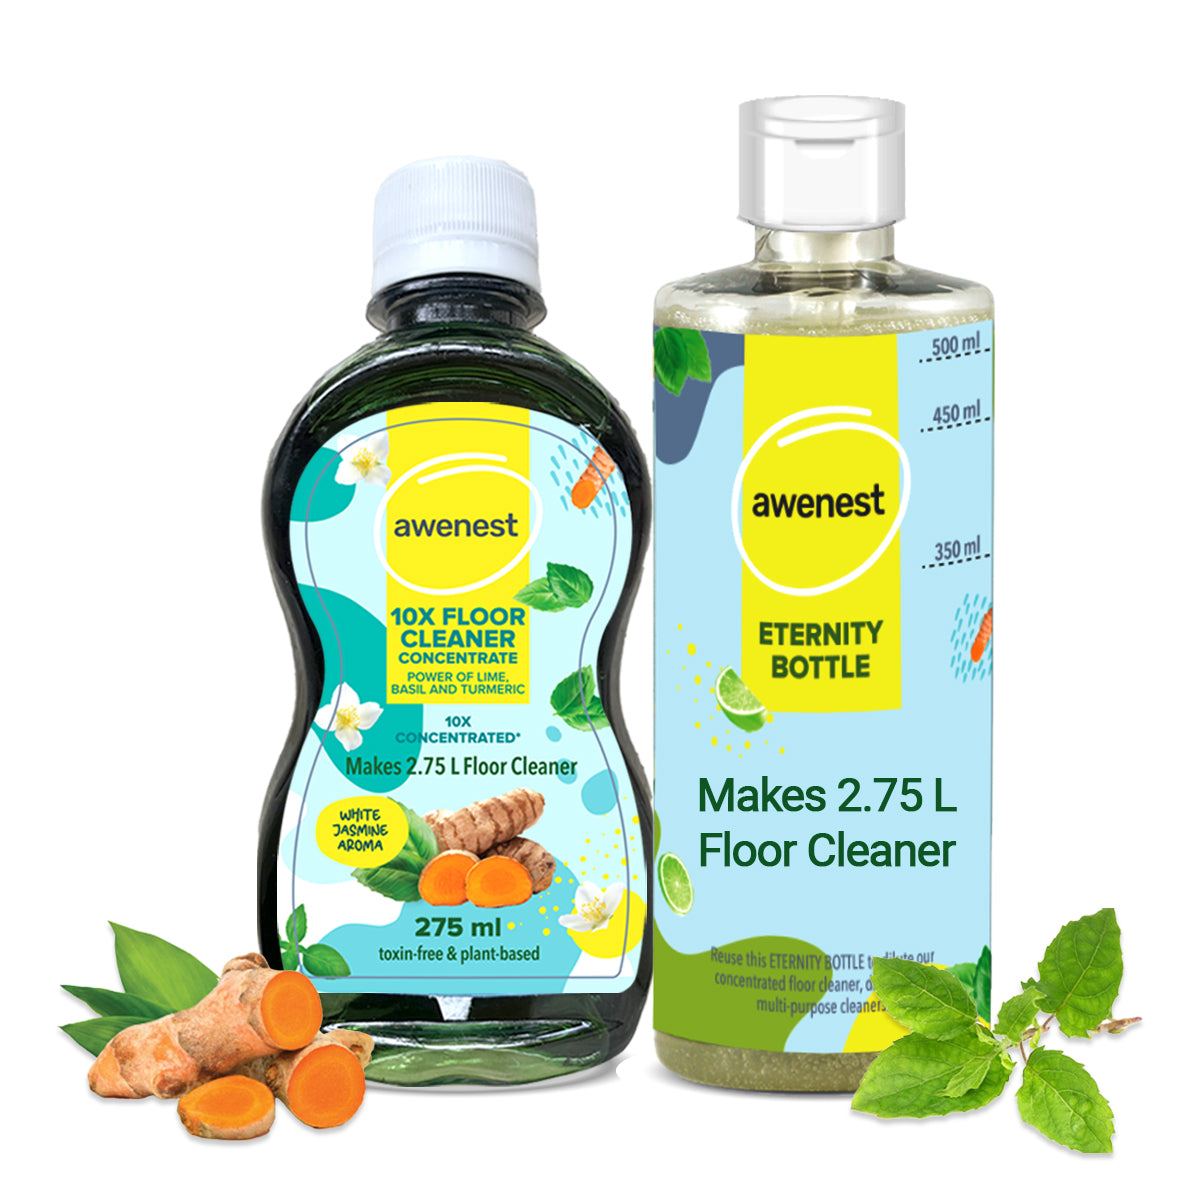 awenest 10x toxin-free, lime, basil and turmeric disinfectant floor cleaner